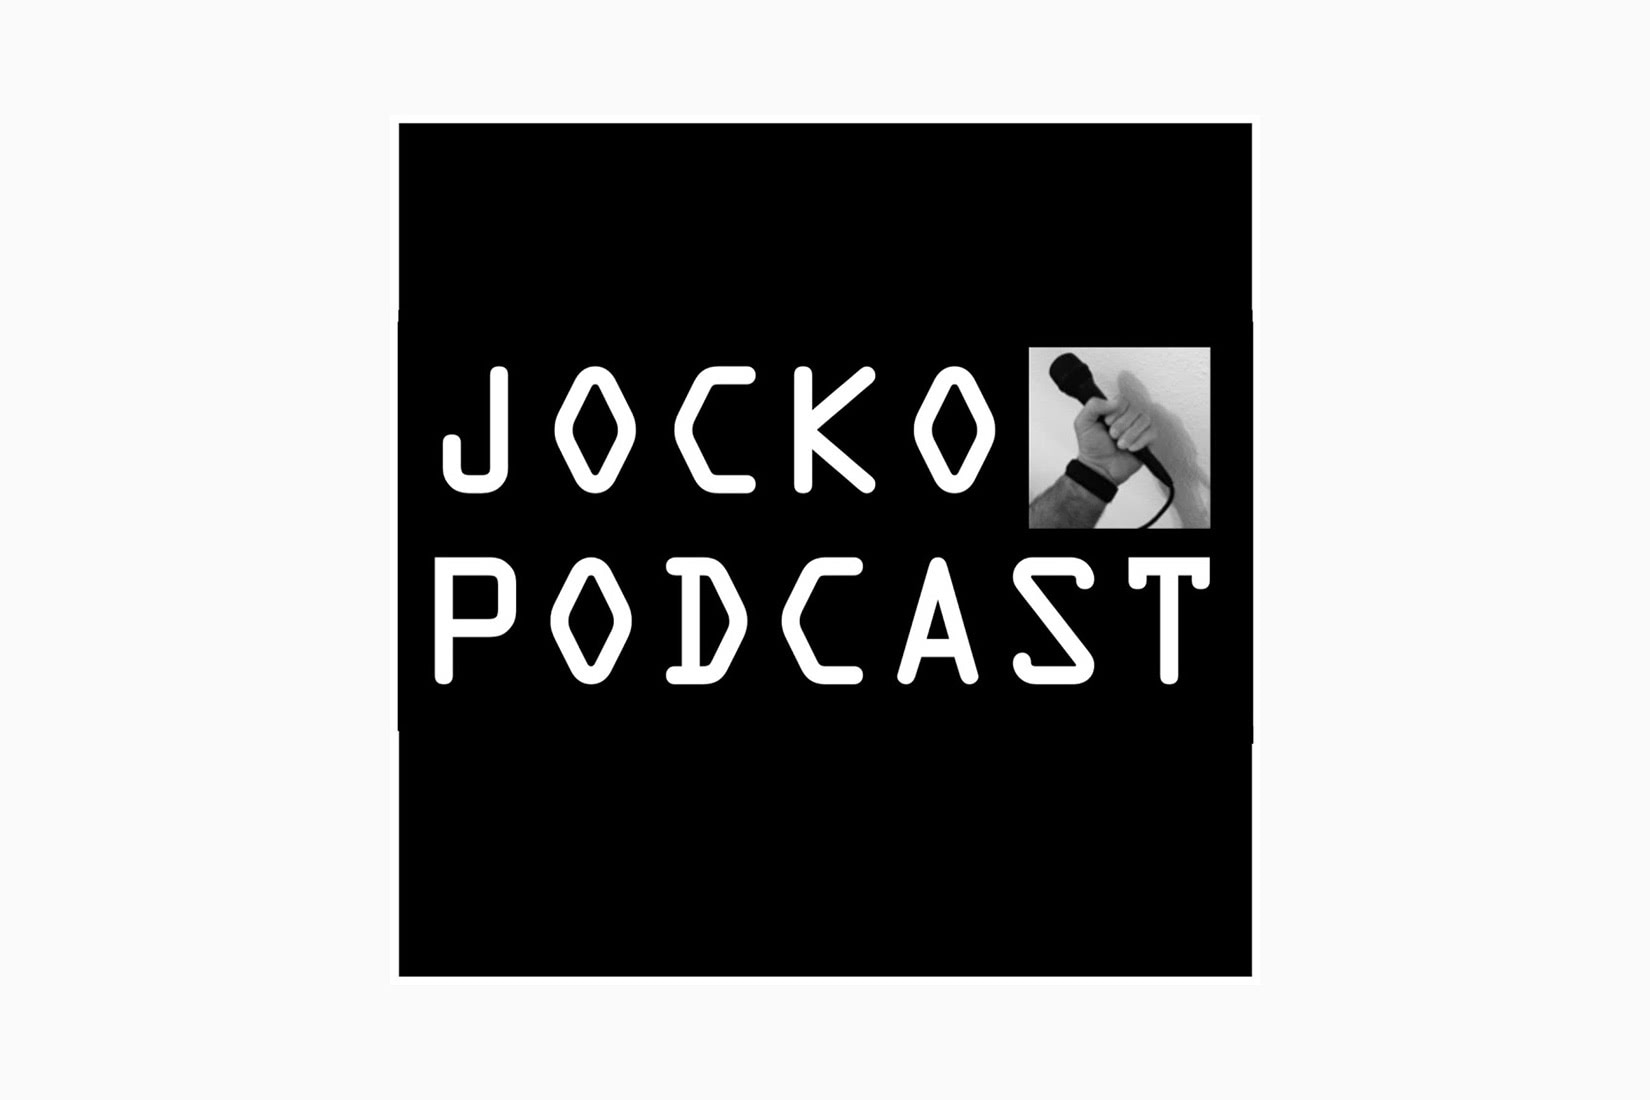 best podcasts jocko podcast luxe digital